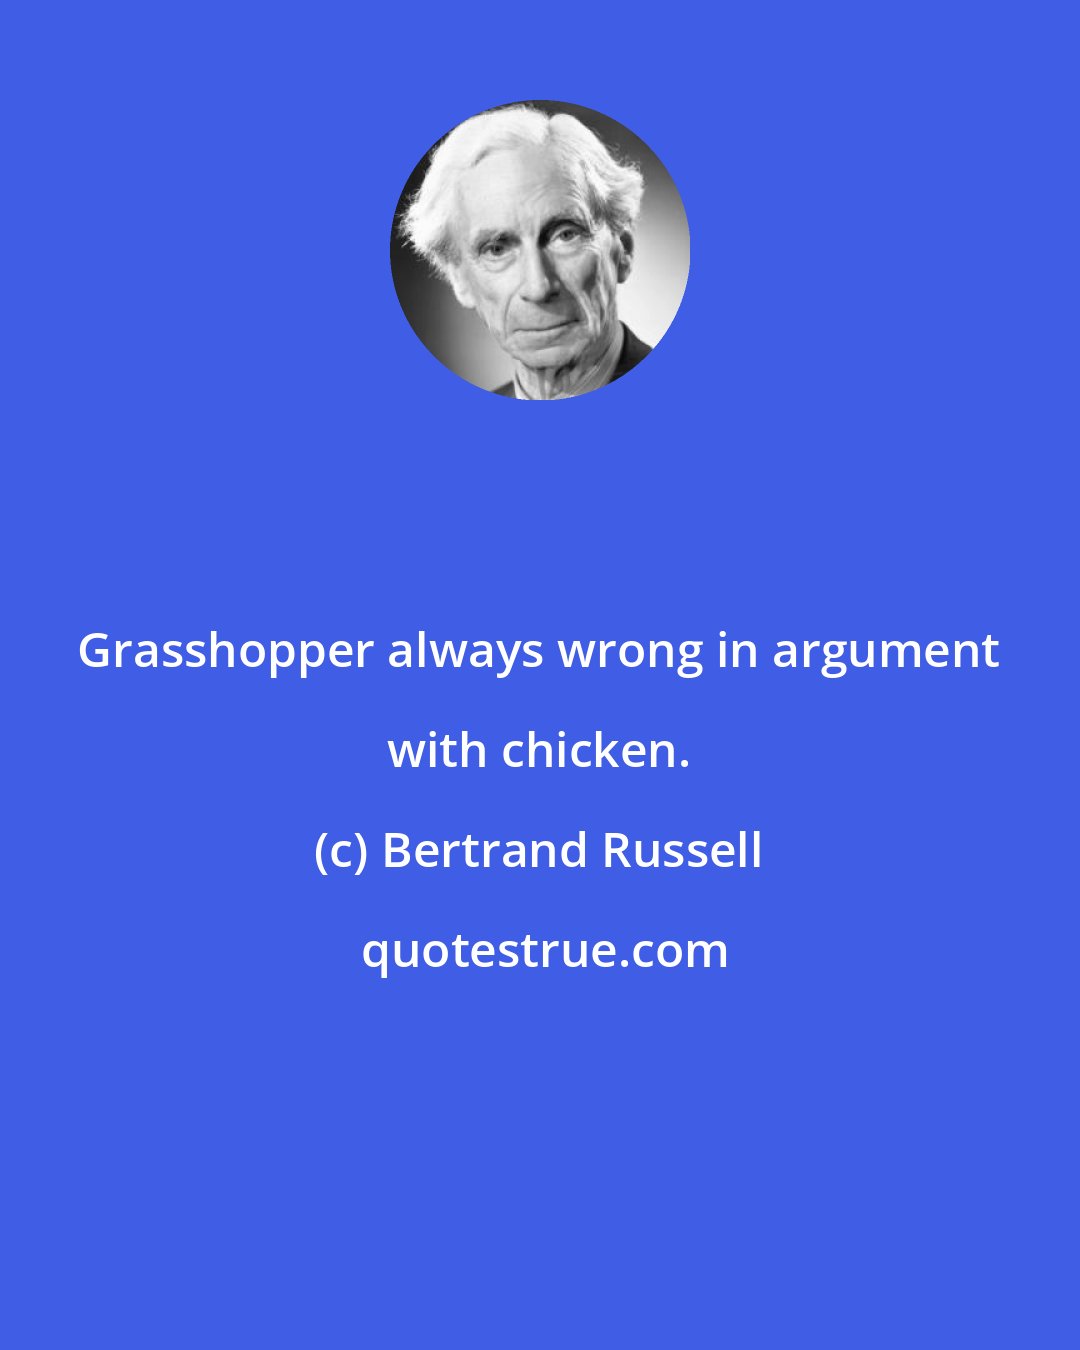 Bertrand Russell: Grasshopper always wrong in argument with chicken.